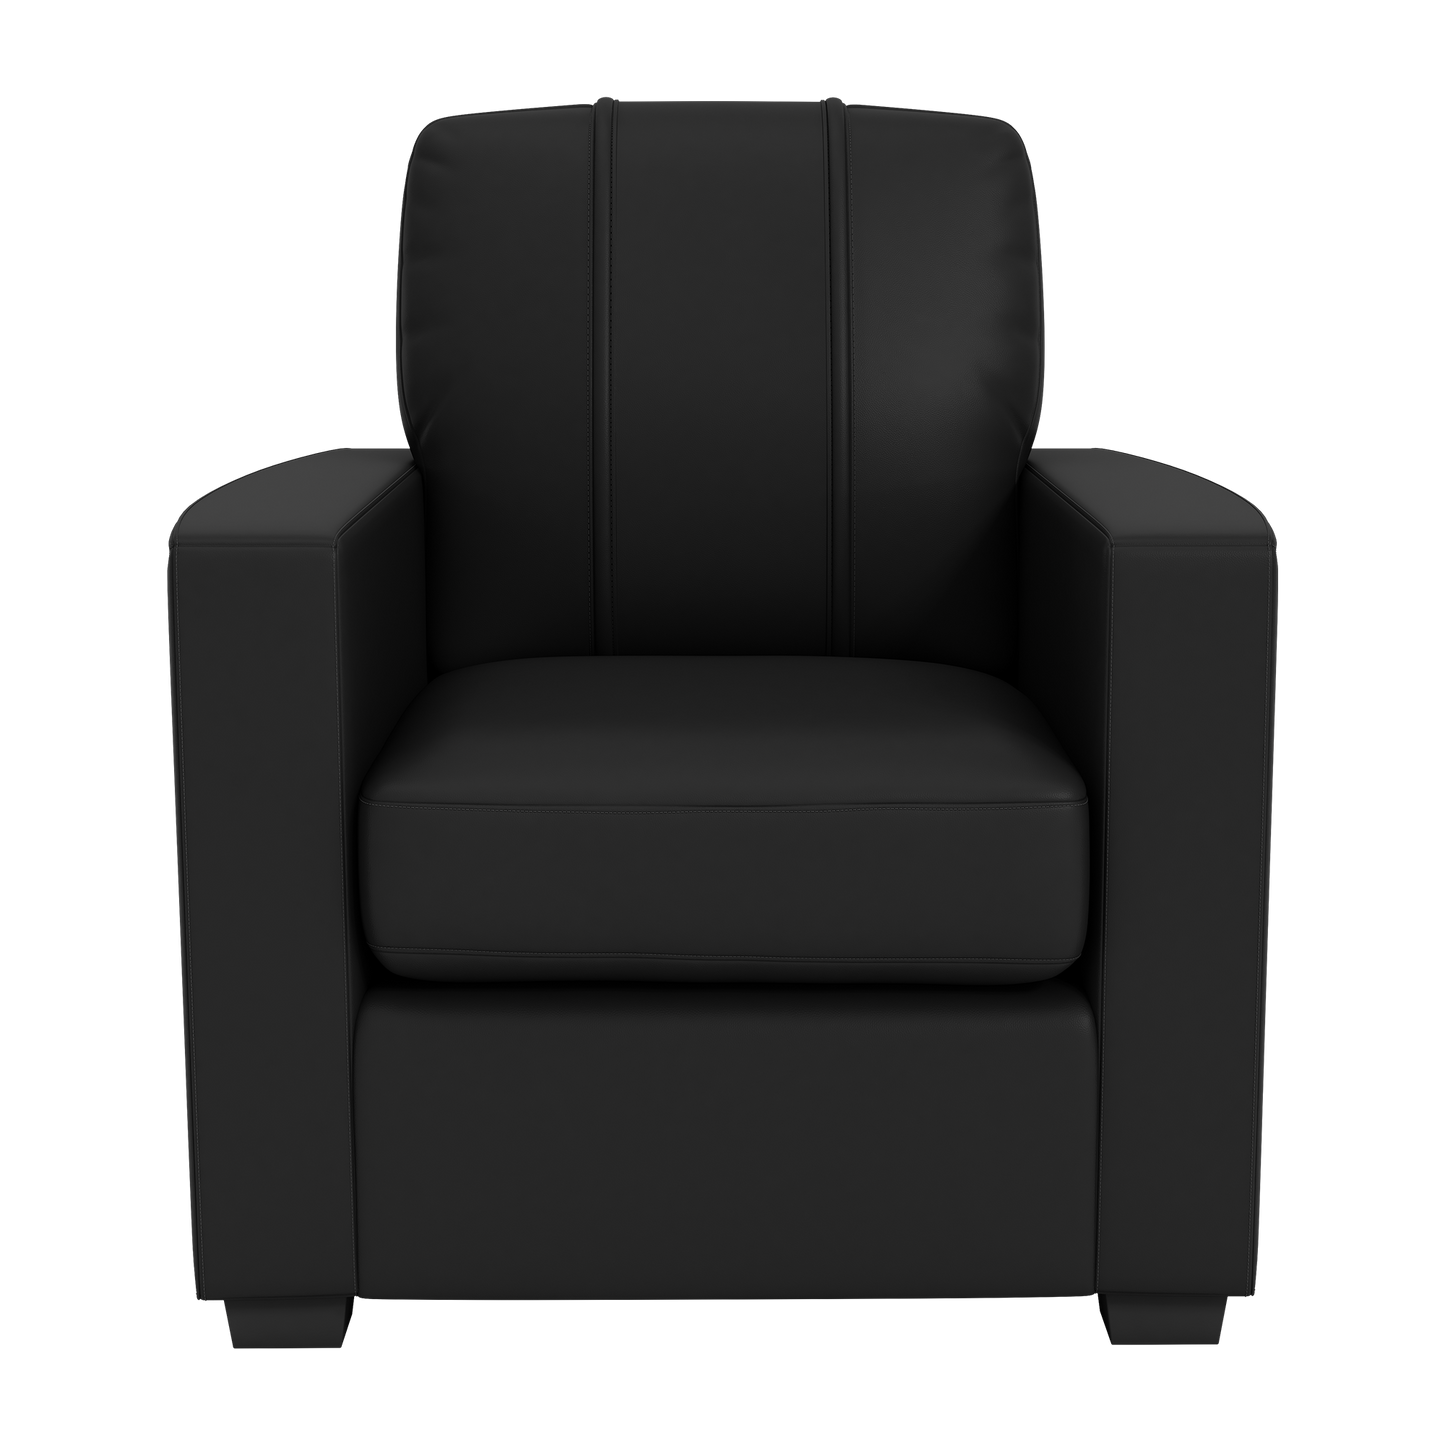 Silver Club Chair with Los Angeles Angels Logo